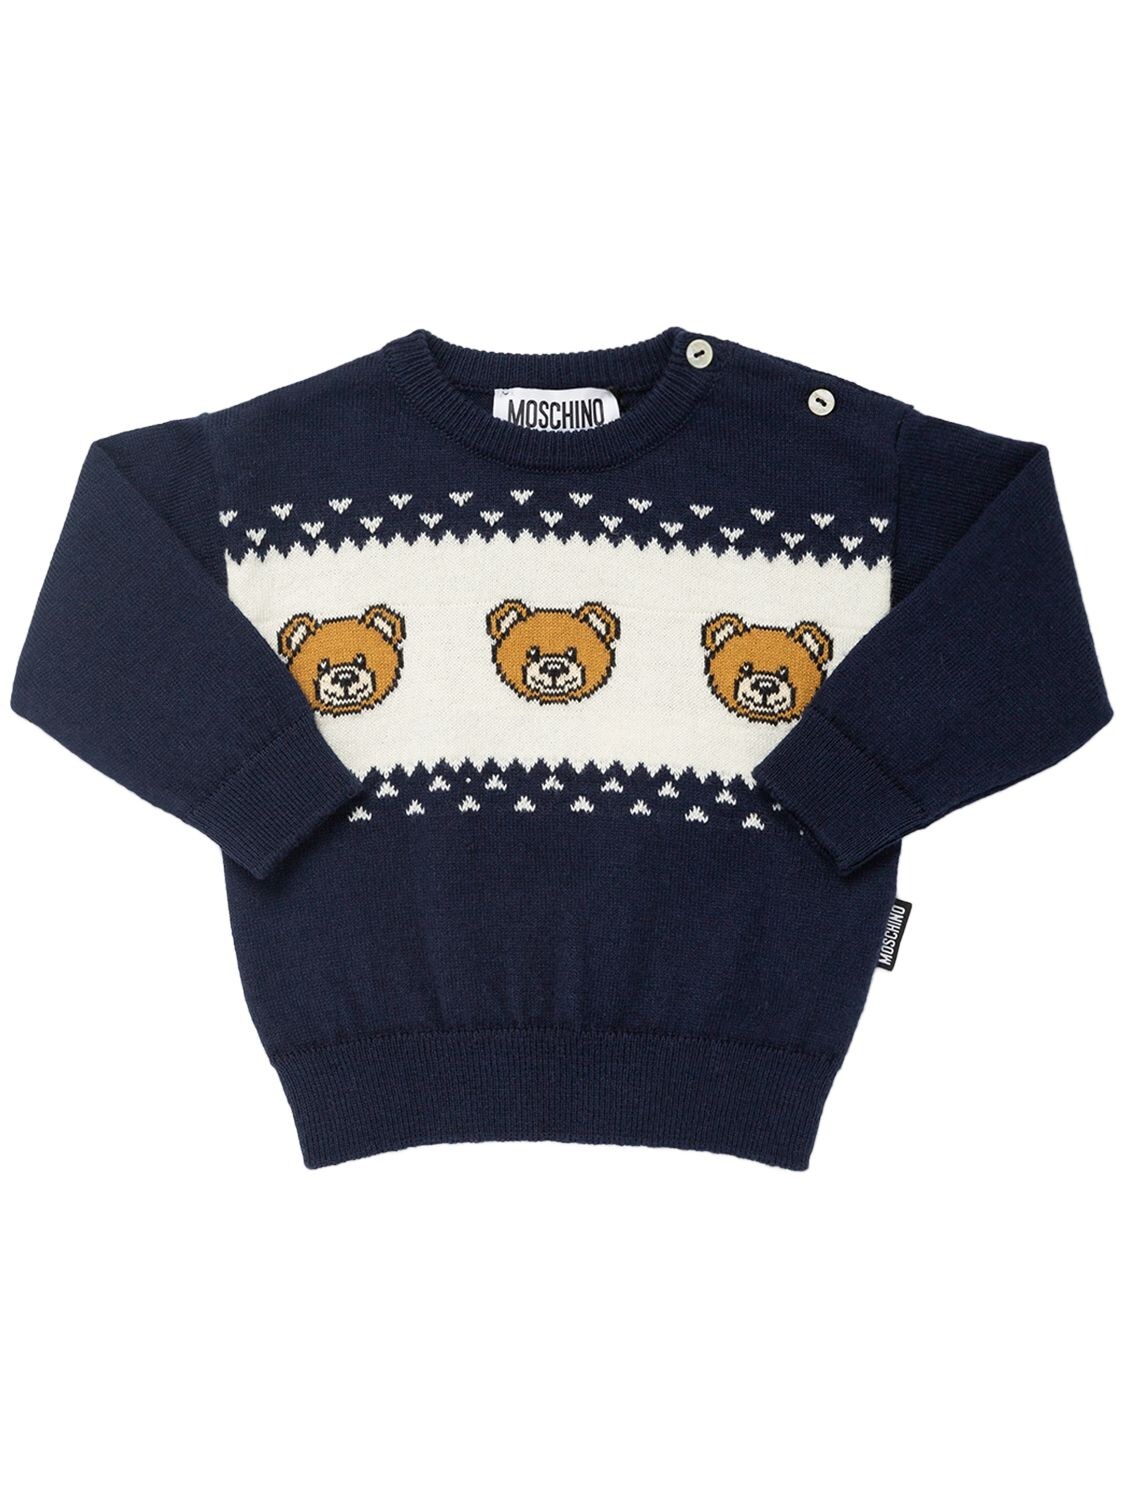 Moschino Kids' Wool & Cotton Jacquard Knit Sweater In Navy